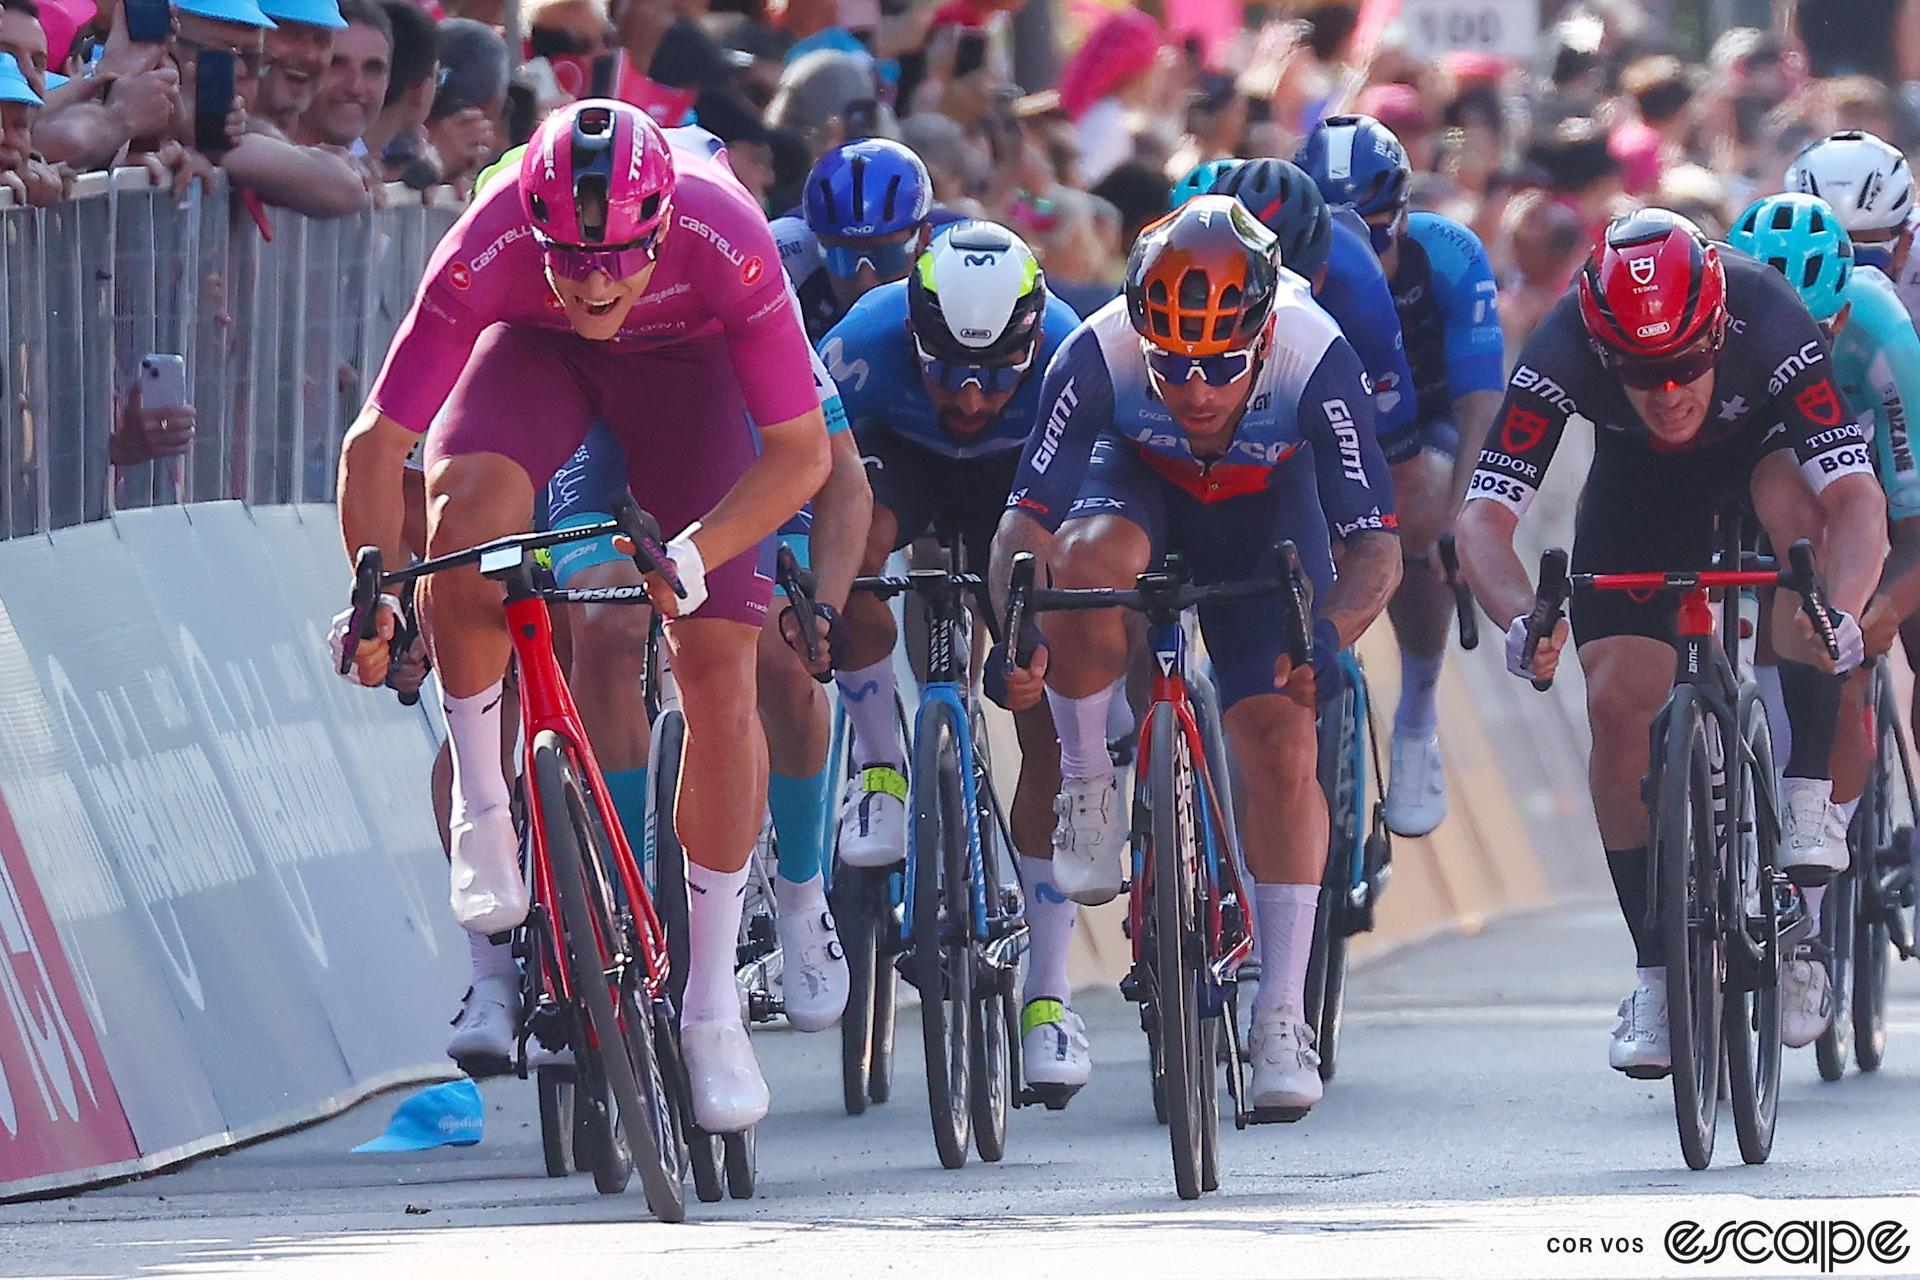 Jonathan Milan, in the fuschia jersey and shorts of the Giro d'Italia's points leader, charges toward the finish line on stage 5 of the race.